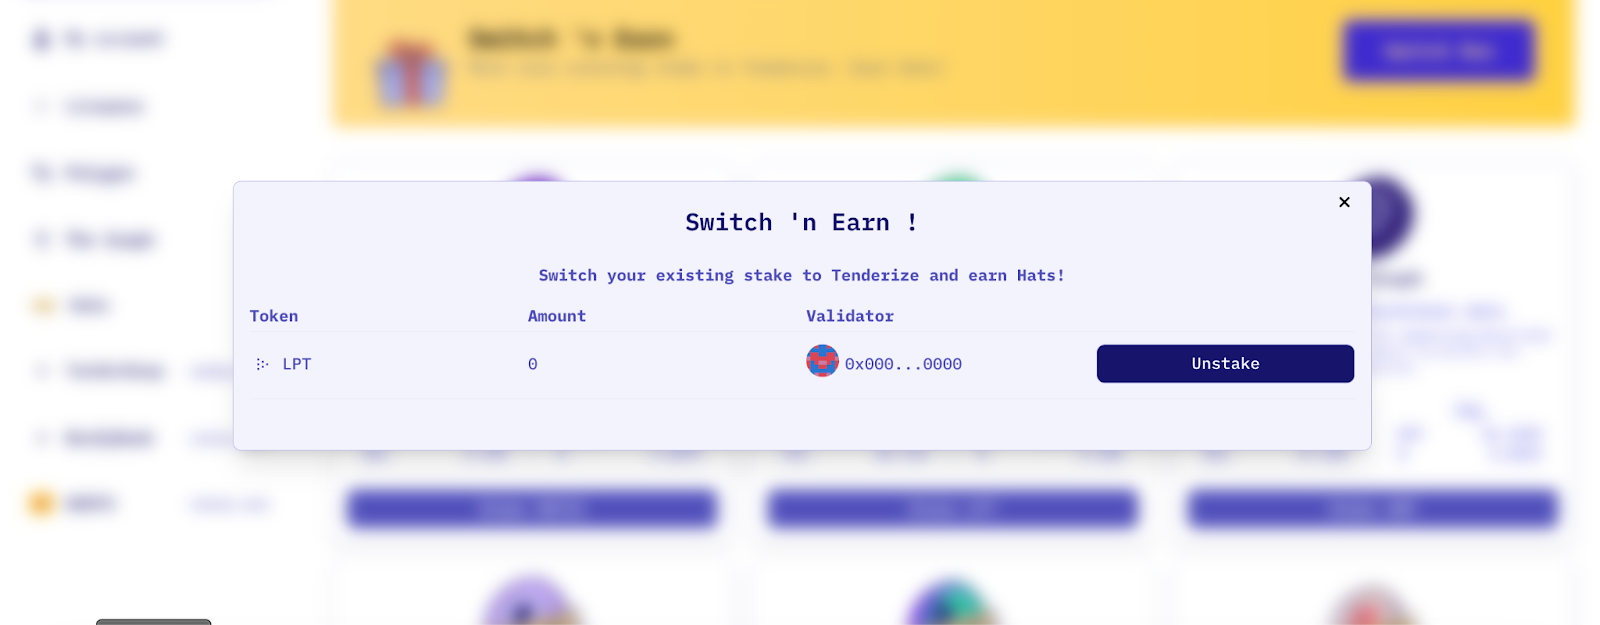 A Deep Dive into Tenderize's Switch N’Earn Campaign